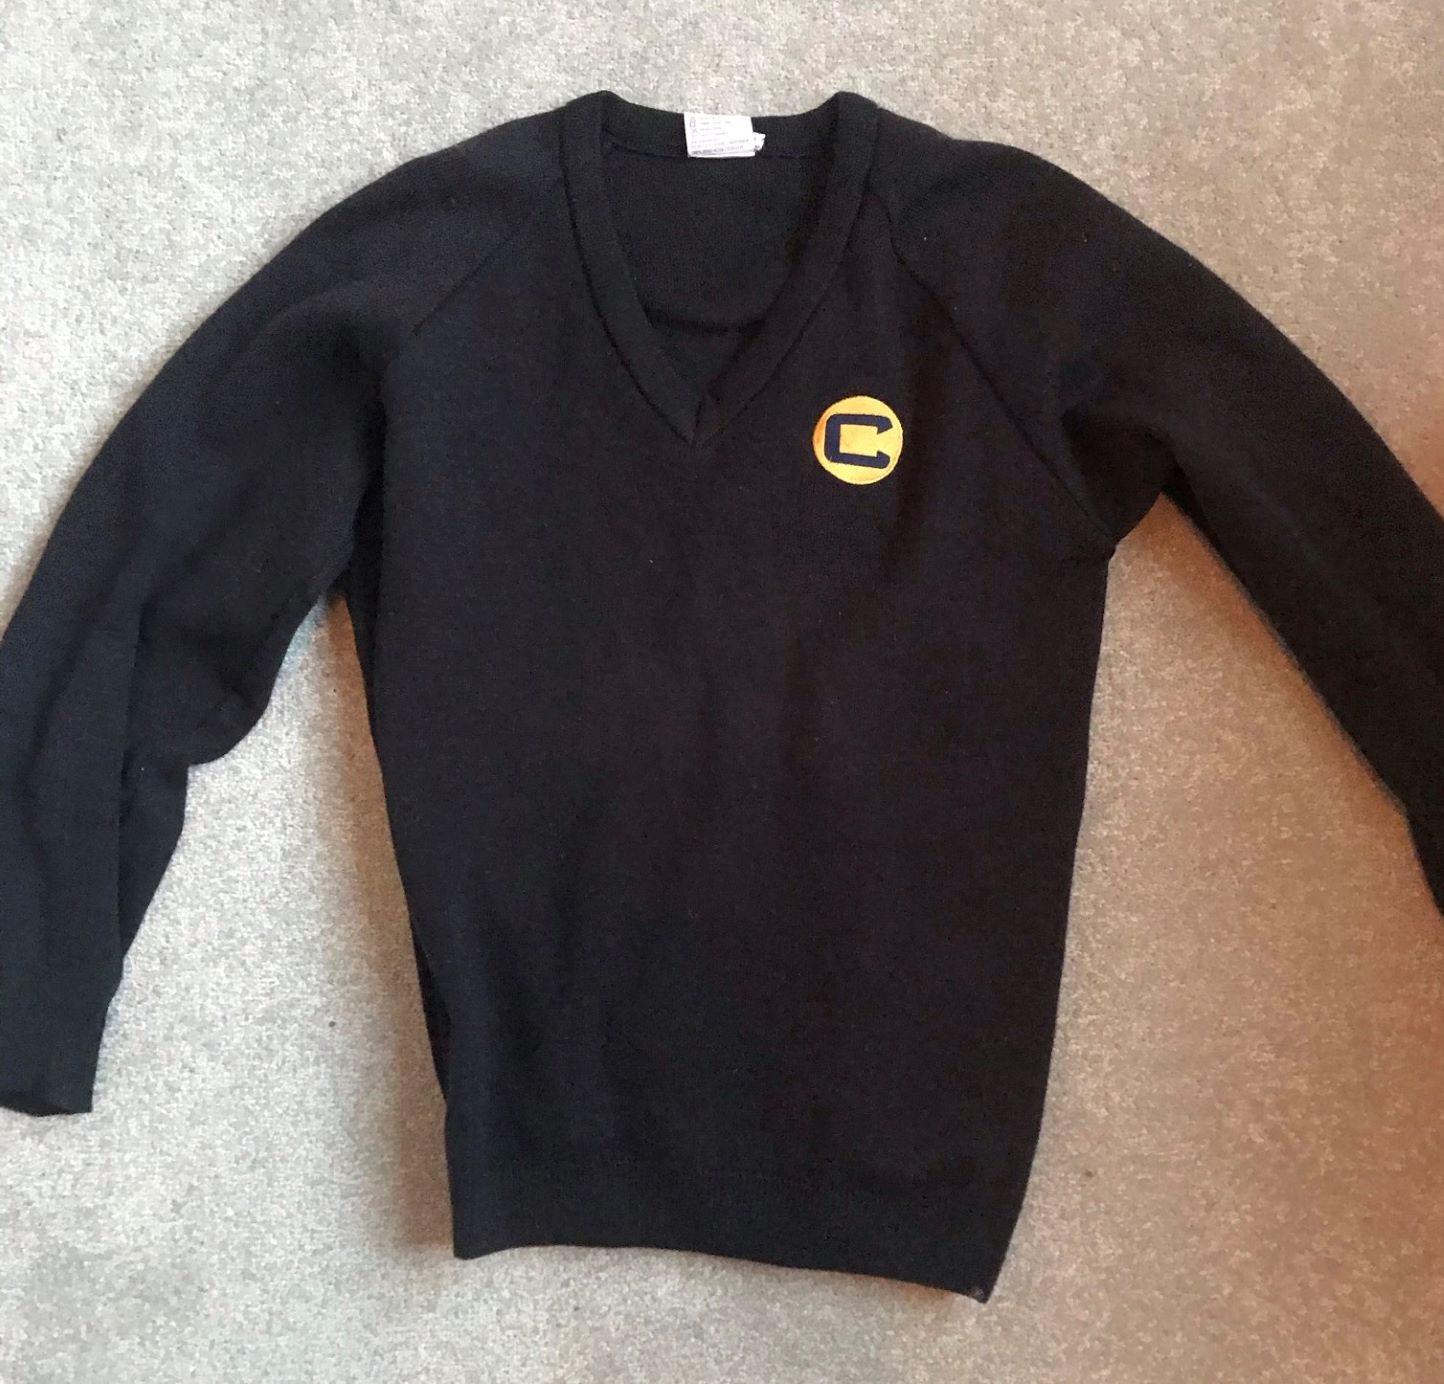 Charter North Jumper: Size 42 Marked